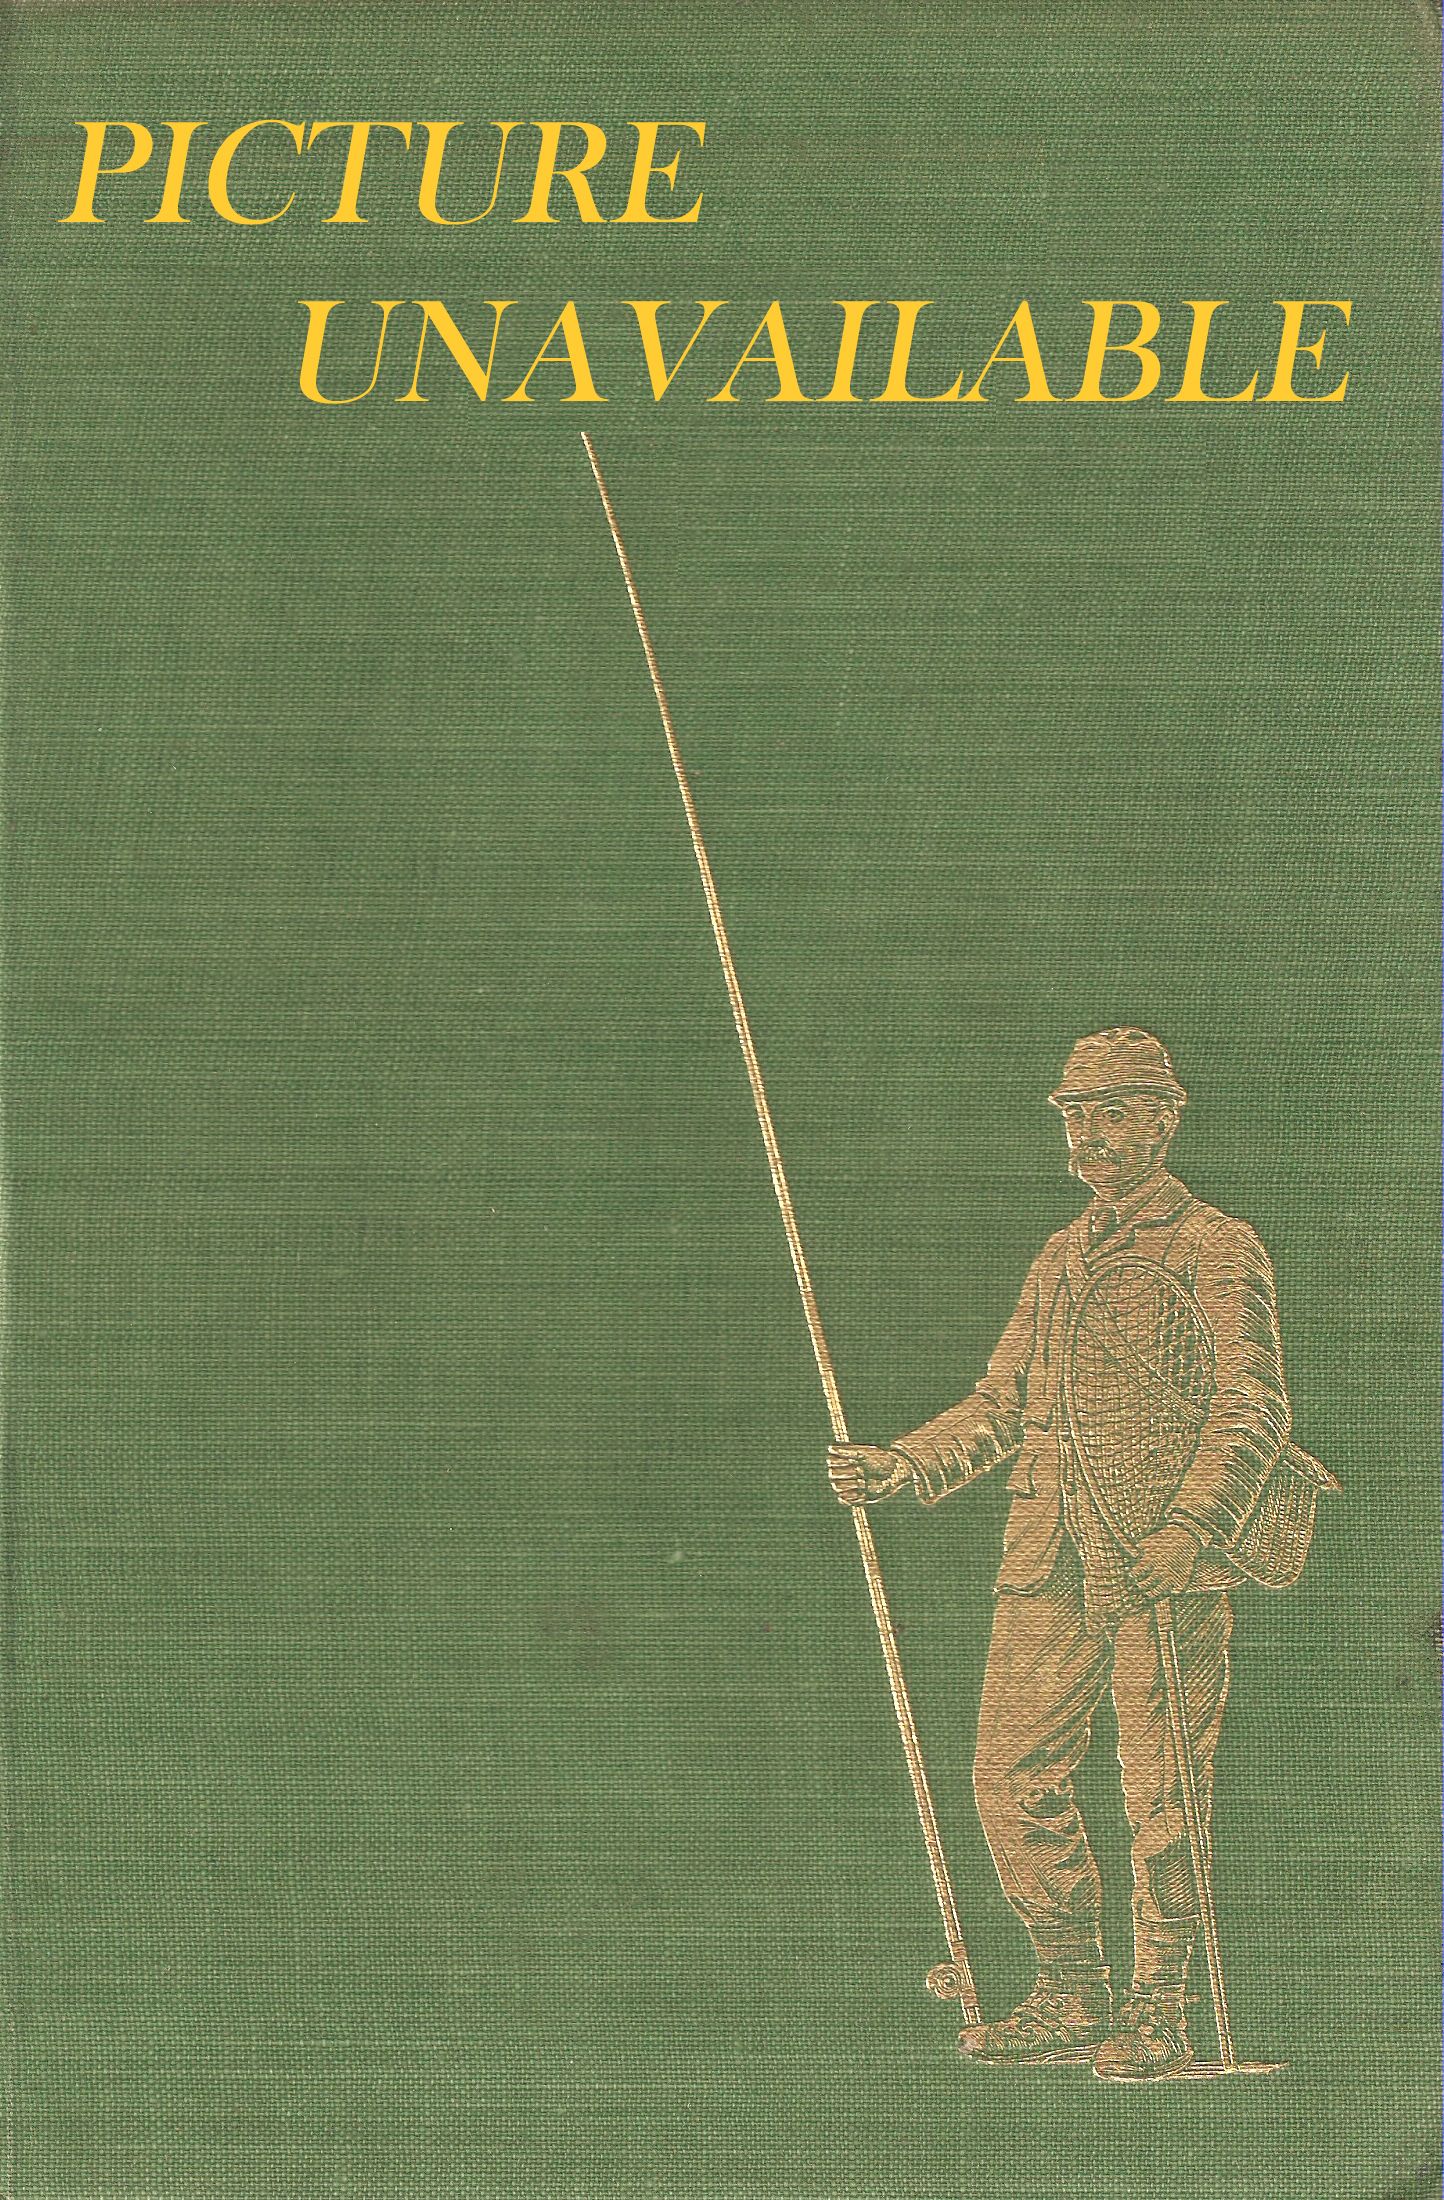 THE QUEST FOR BARBEL. By William J. Howes.